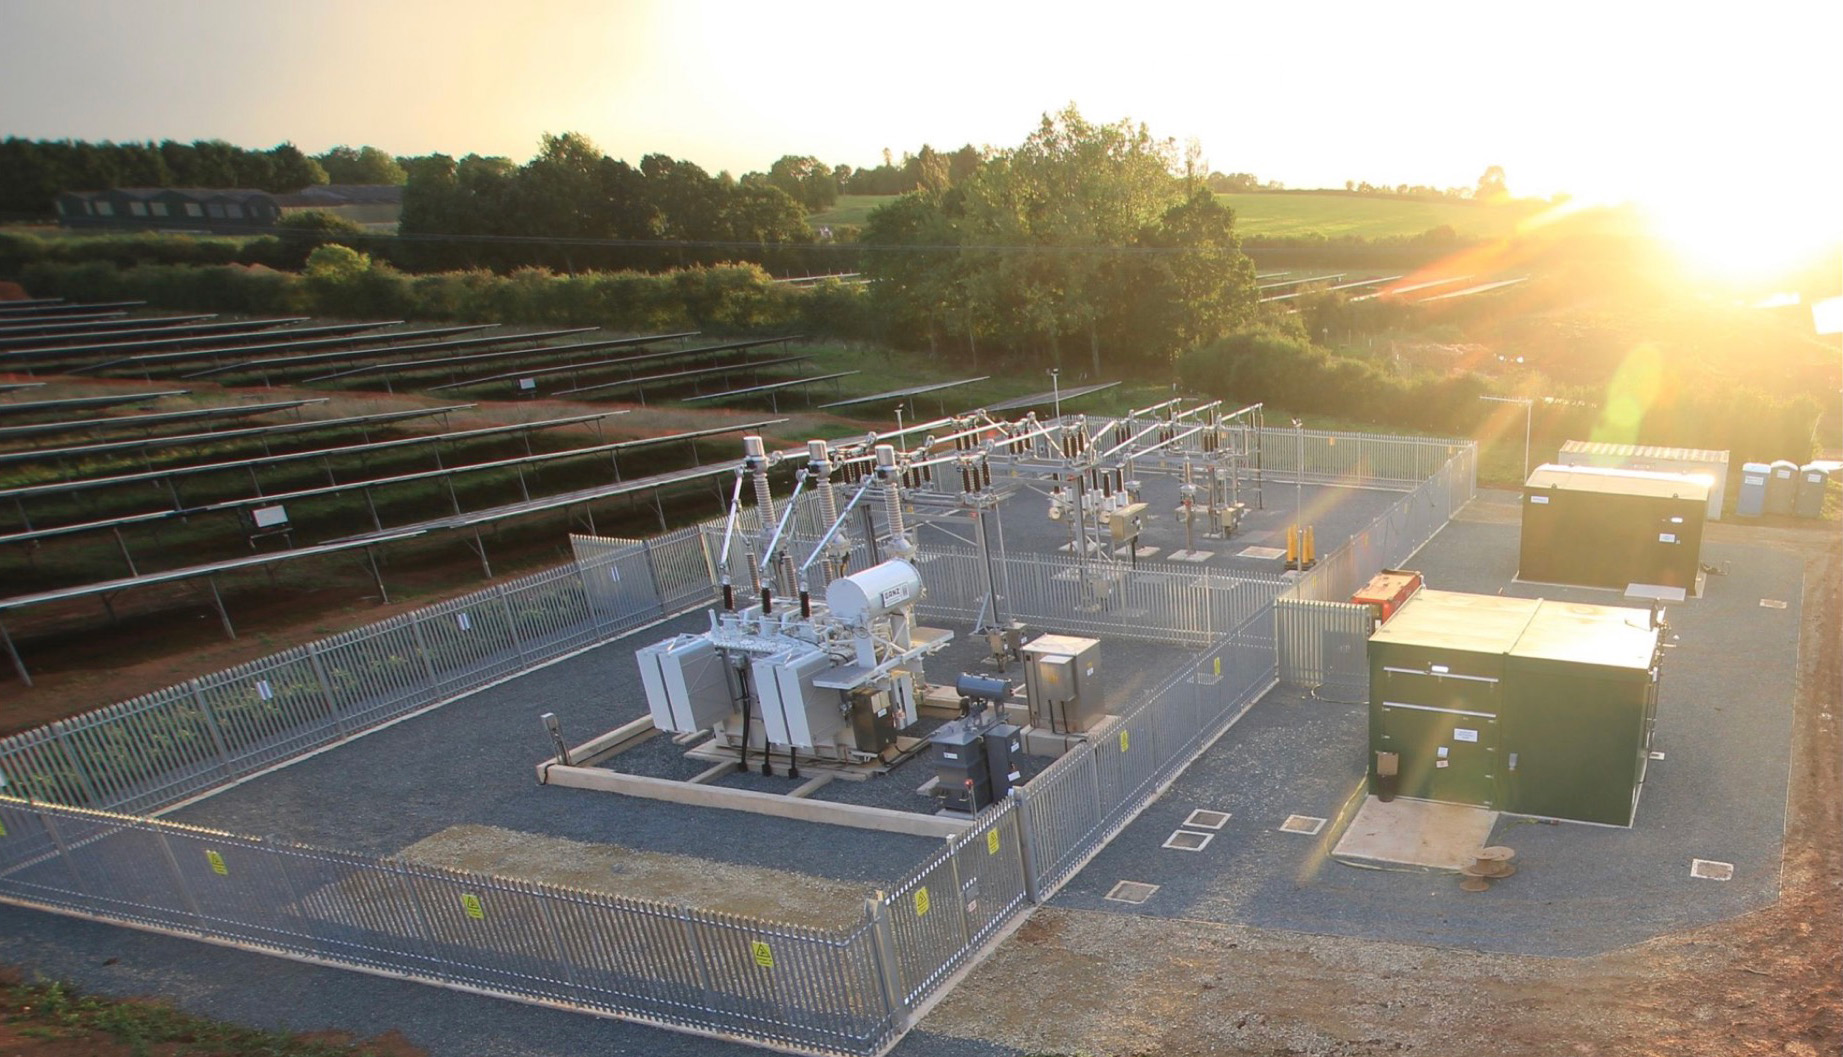 a birds eye view of an electrical substation site